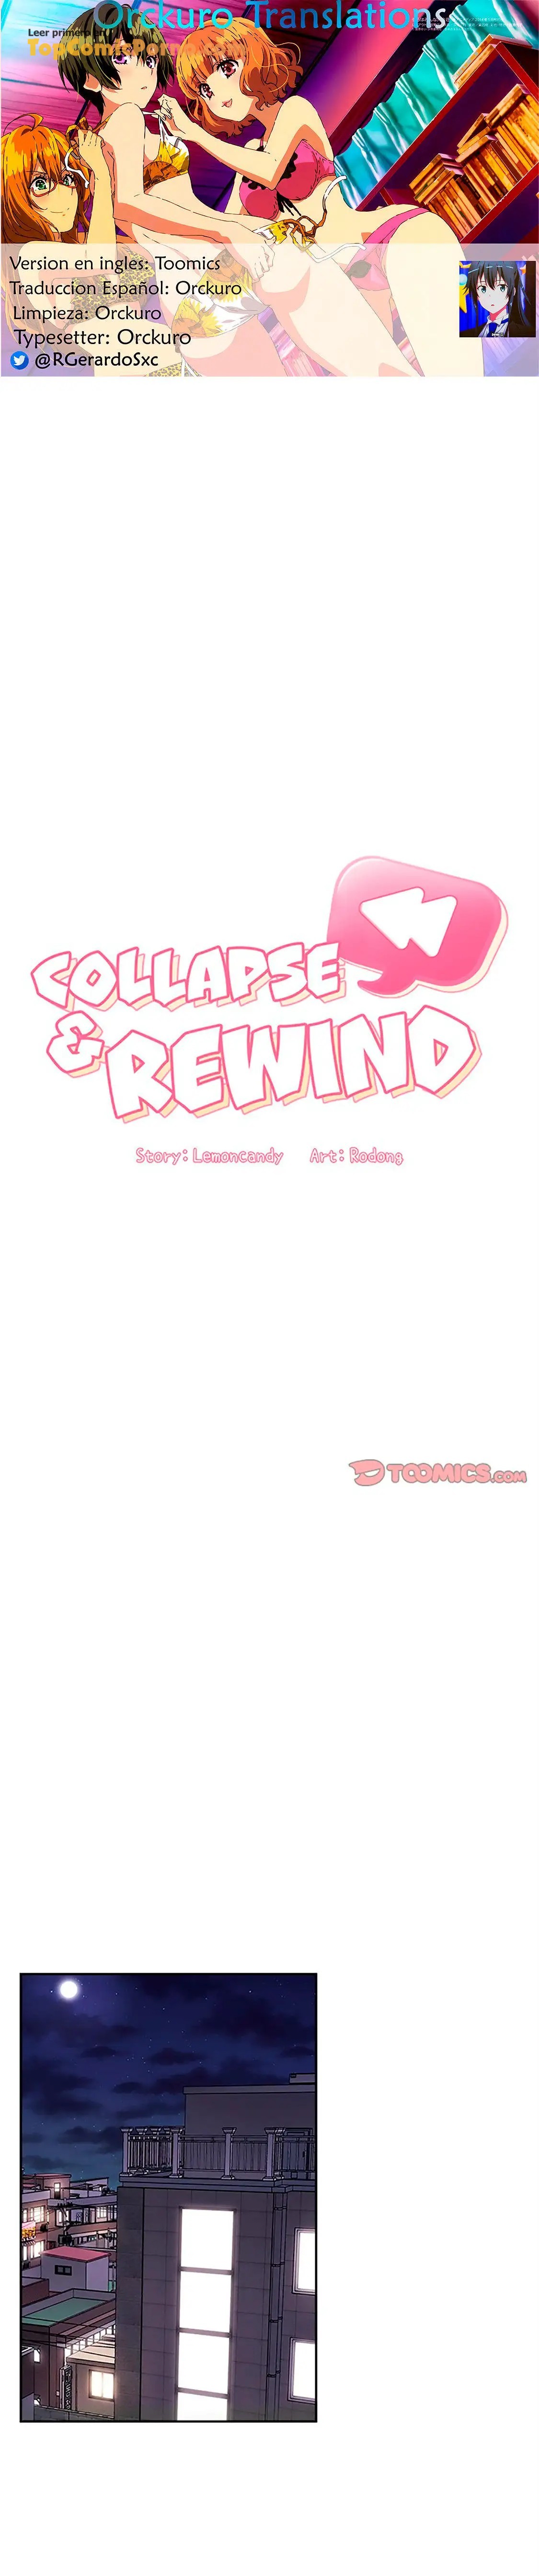 Collapse and rewind toomics free